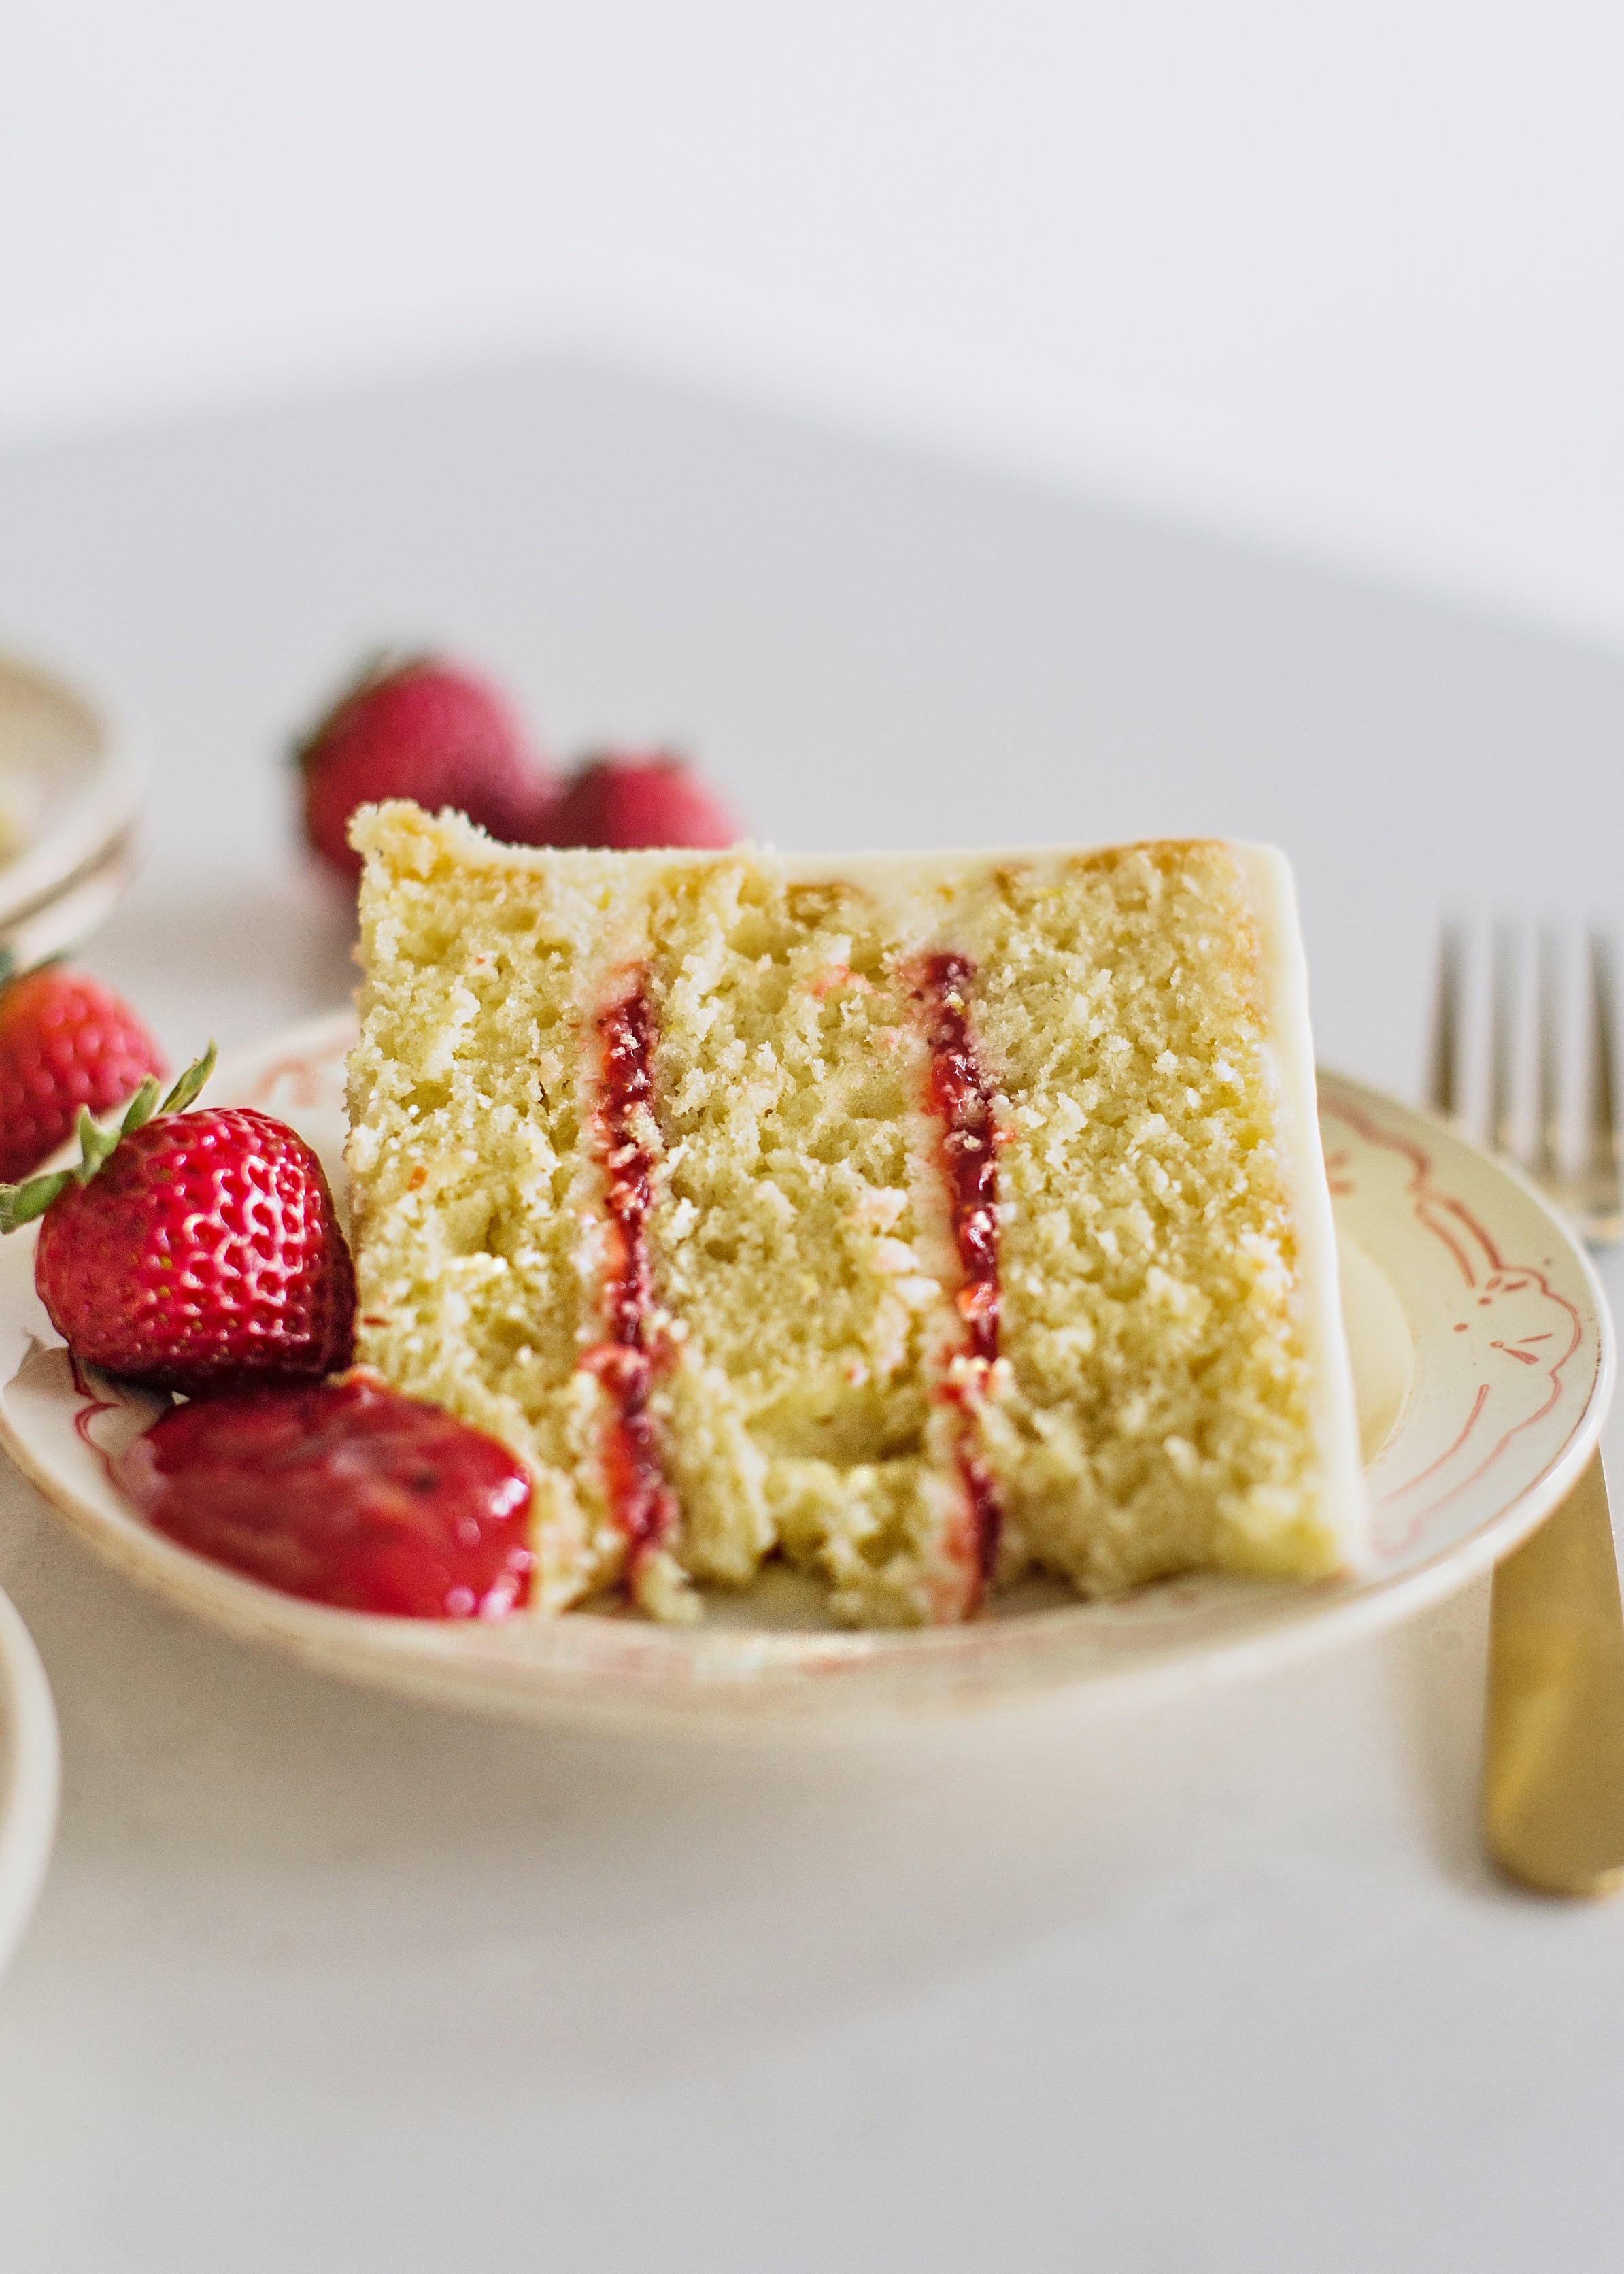 Slice of Olive Oil cake on a plate with strawberries.